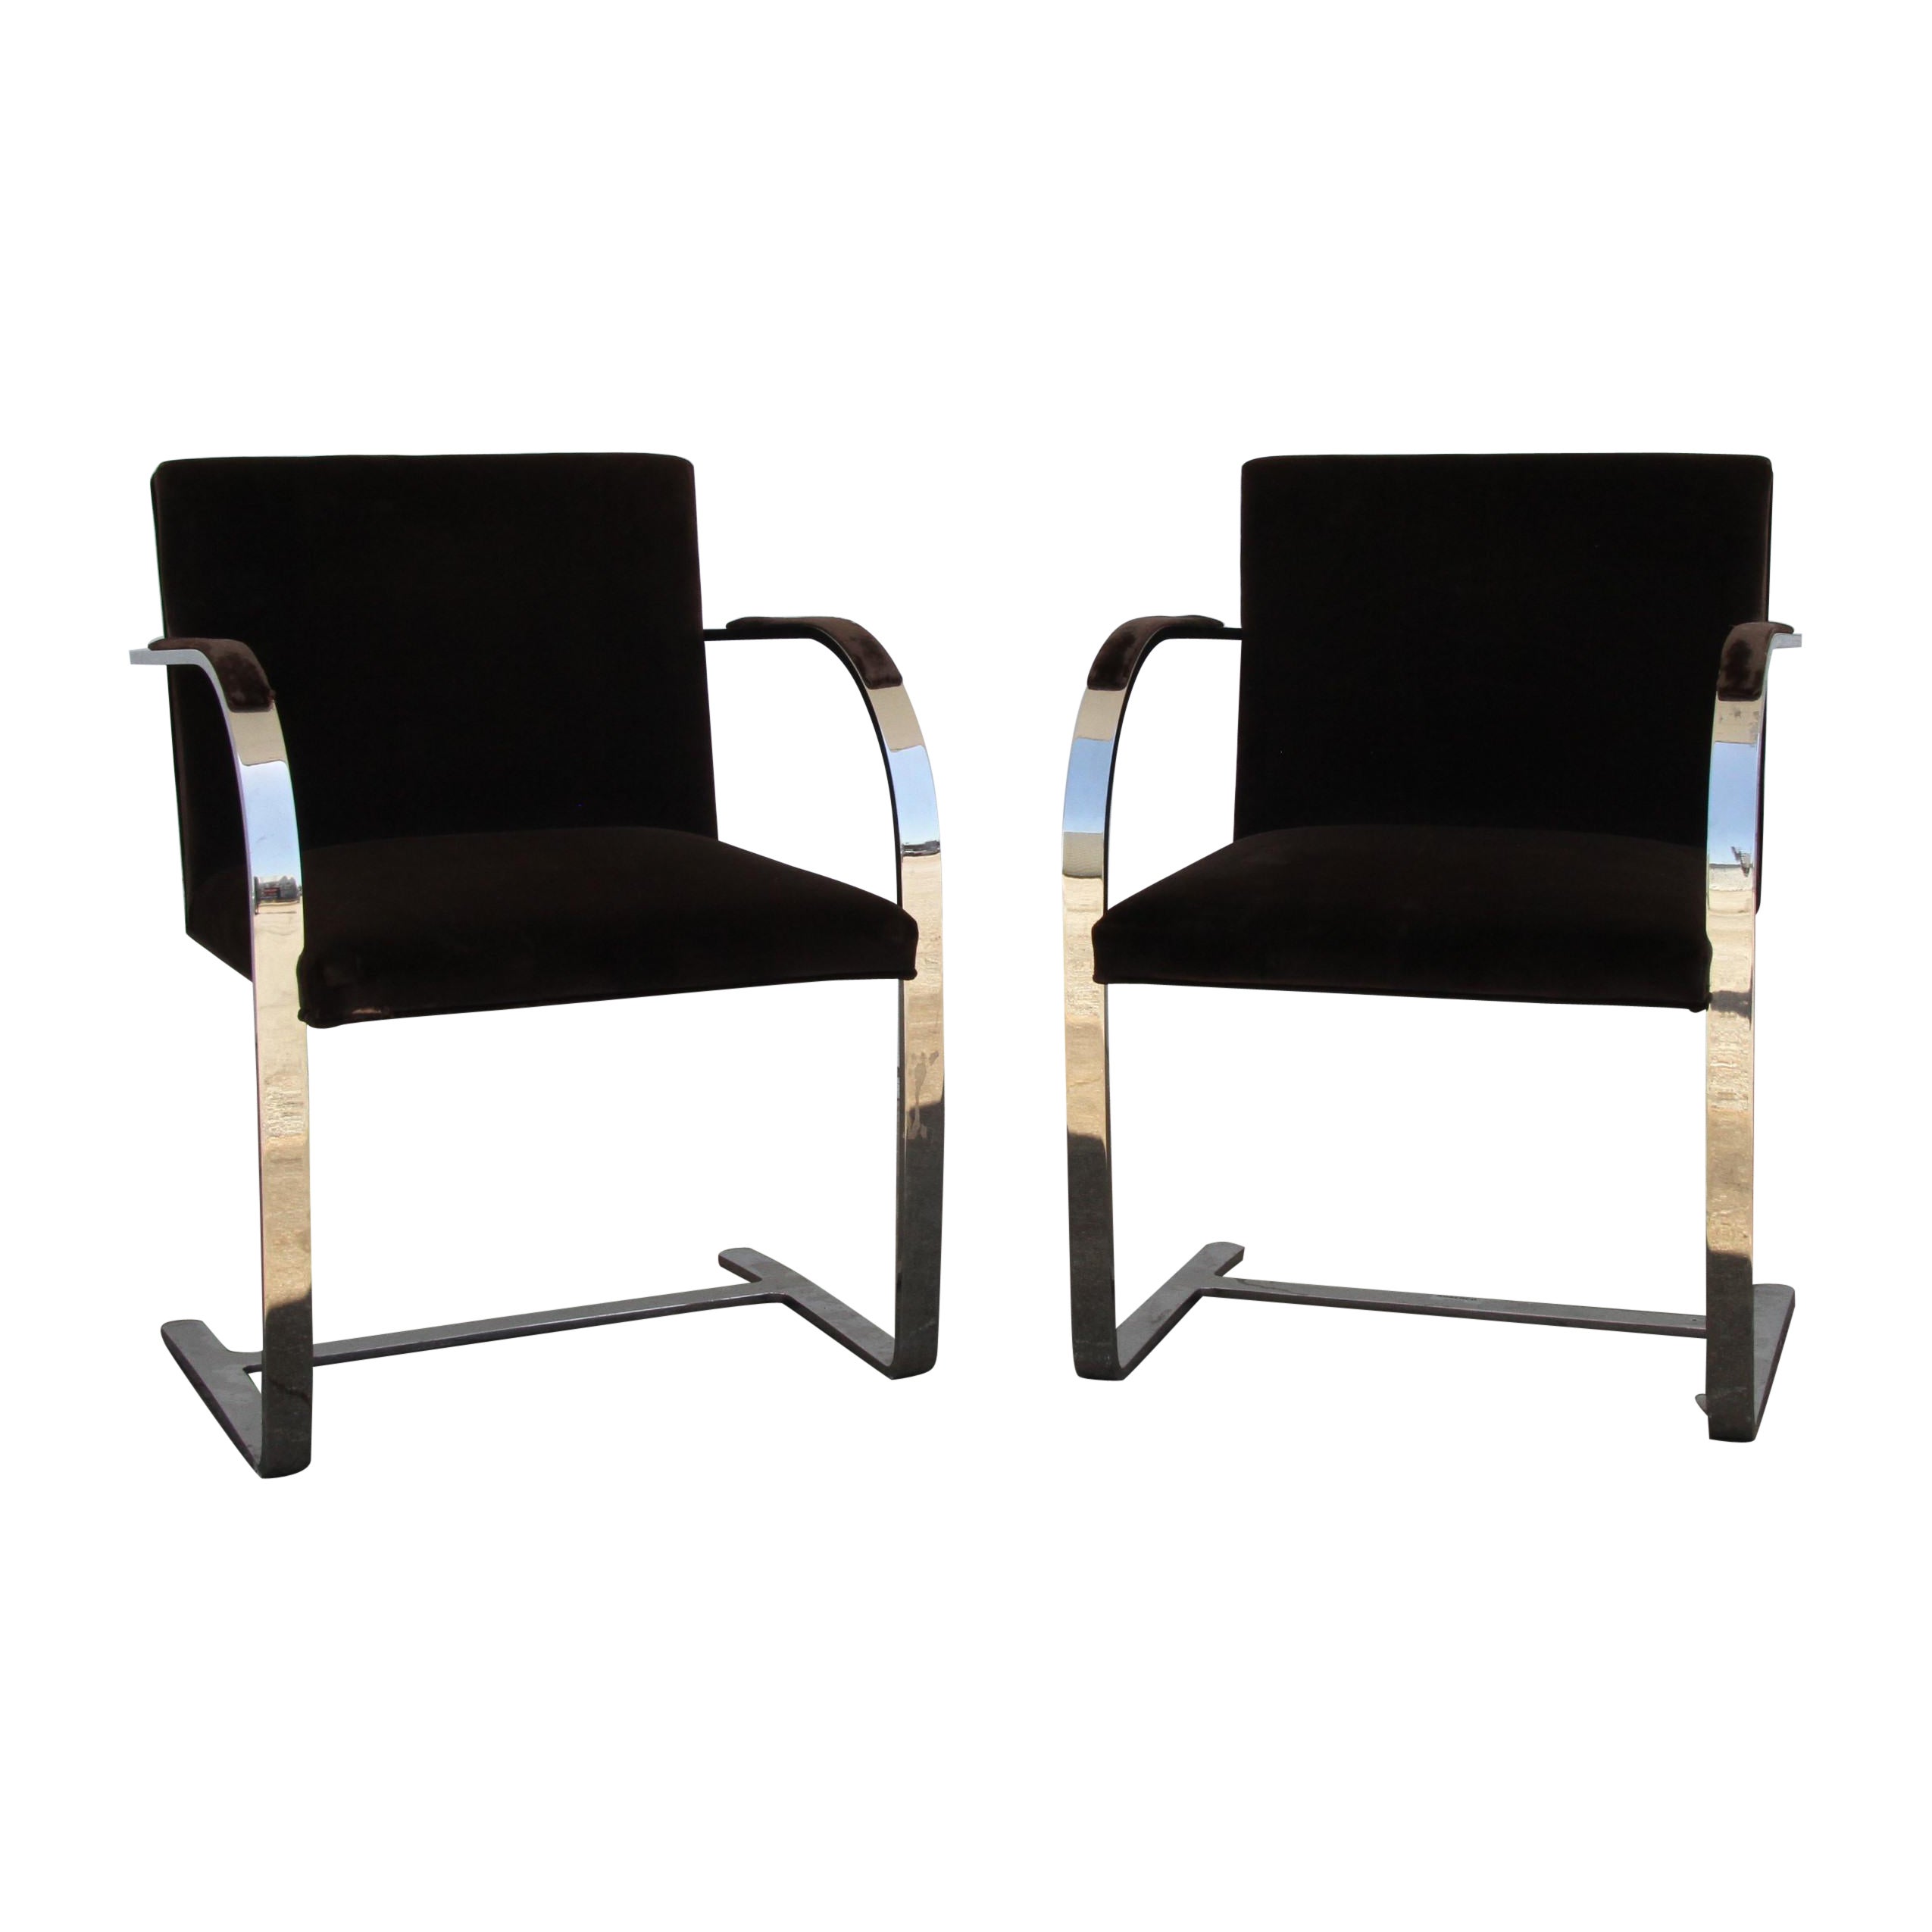 Pair BRNO Stainless Steel Flat Bar Arm Chairs For Sale